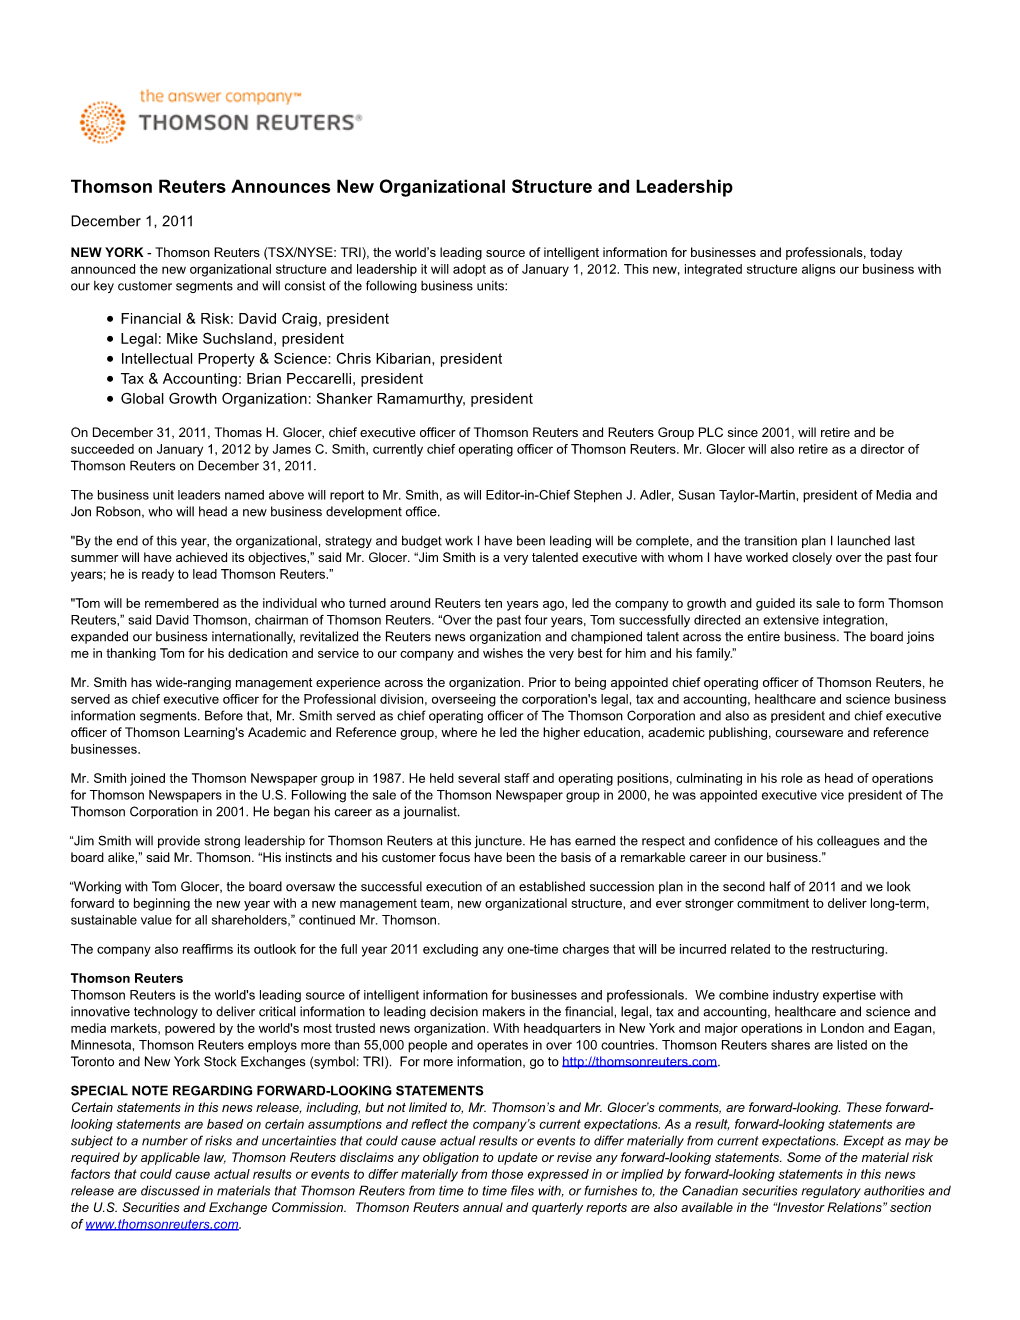 Thomson Reuters Announces New Organizational Structure and Leadership